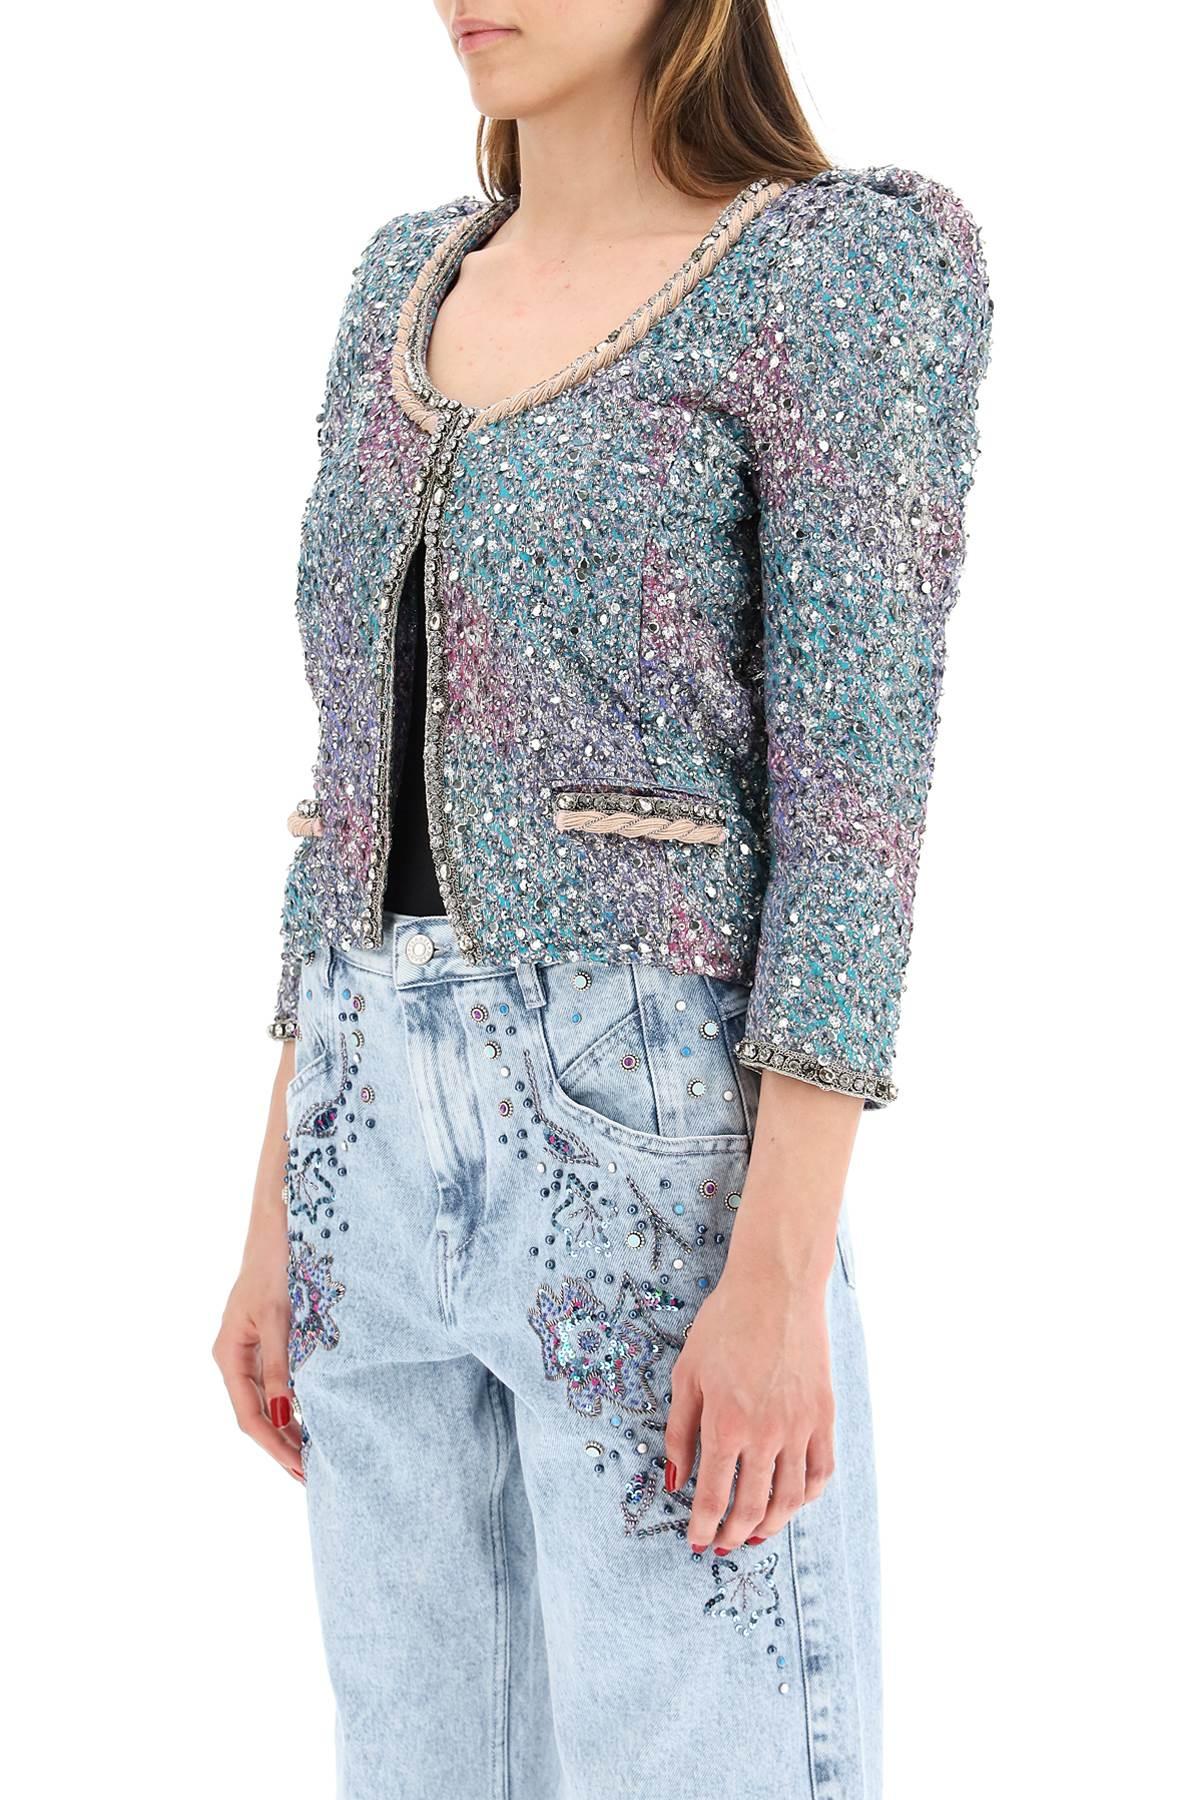 Isabel Marant Apazi Jacket With Sequins in Blue | Lyst